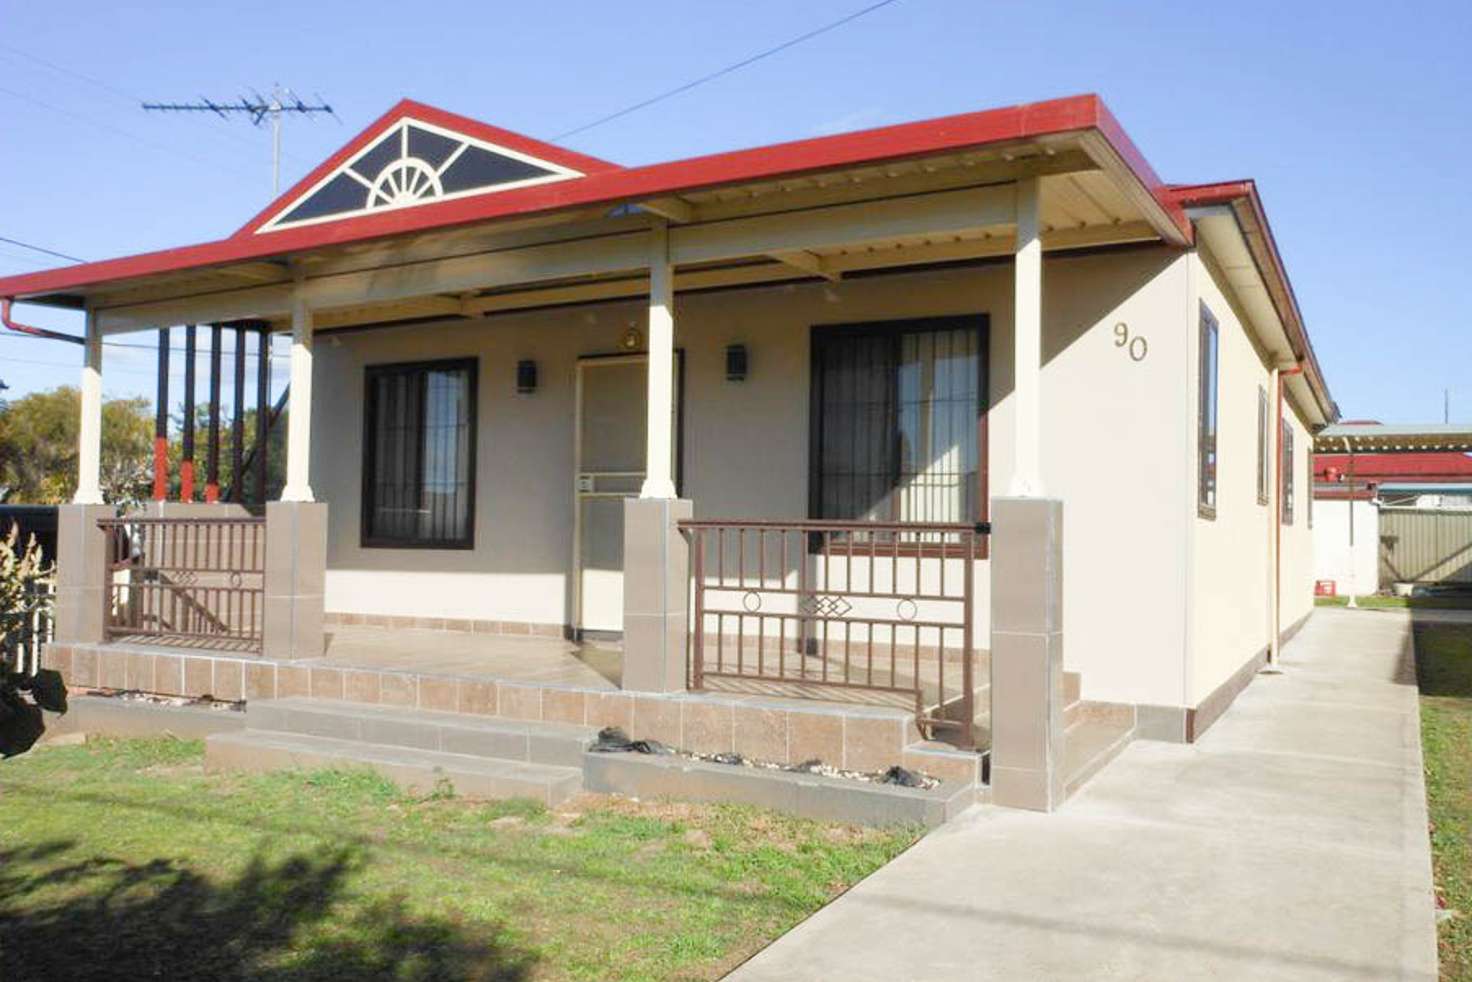 Main view of Homely house listing, 90 QUEEN STREET, Canley Heights NSW 2166